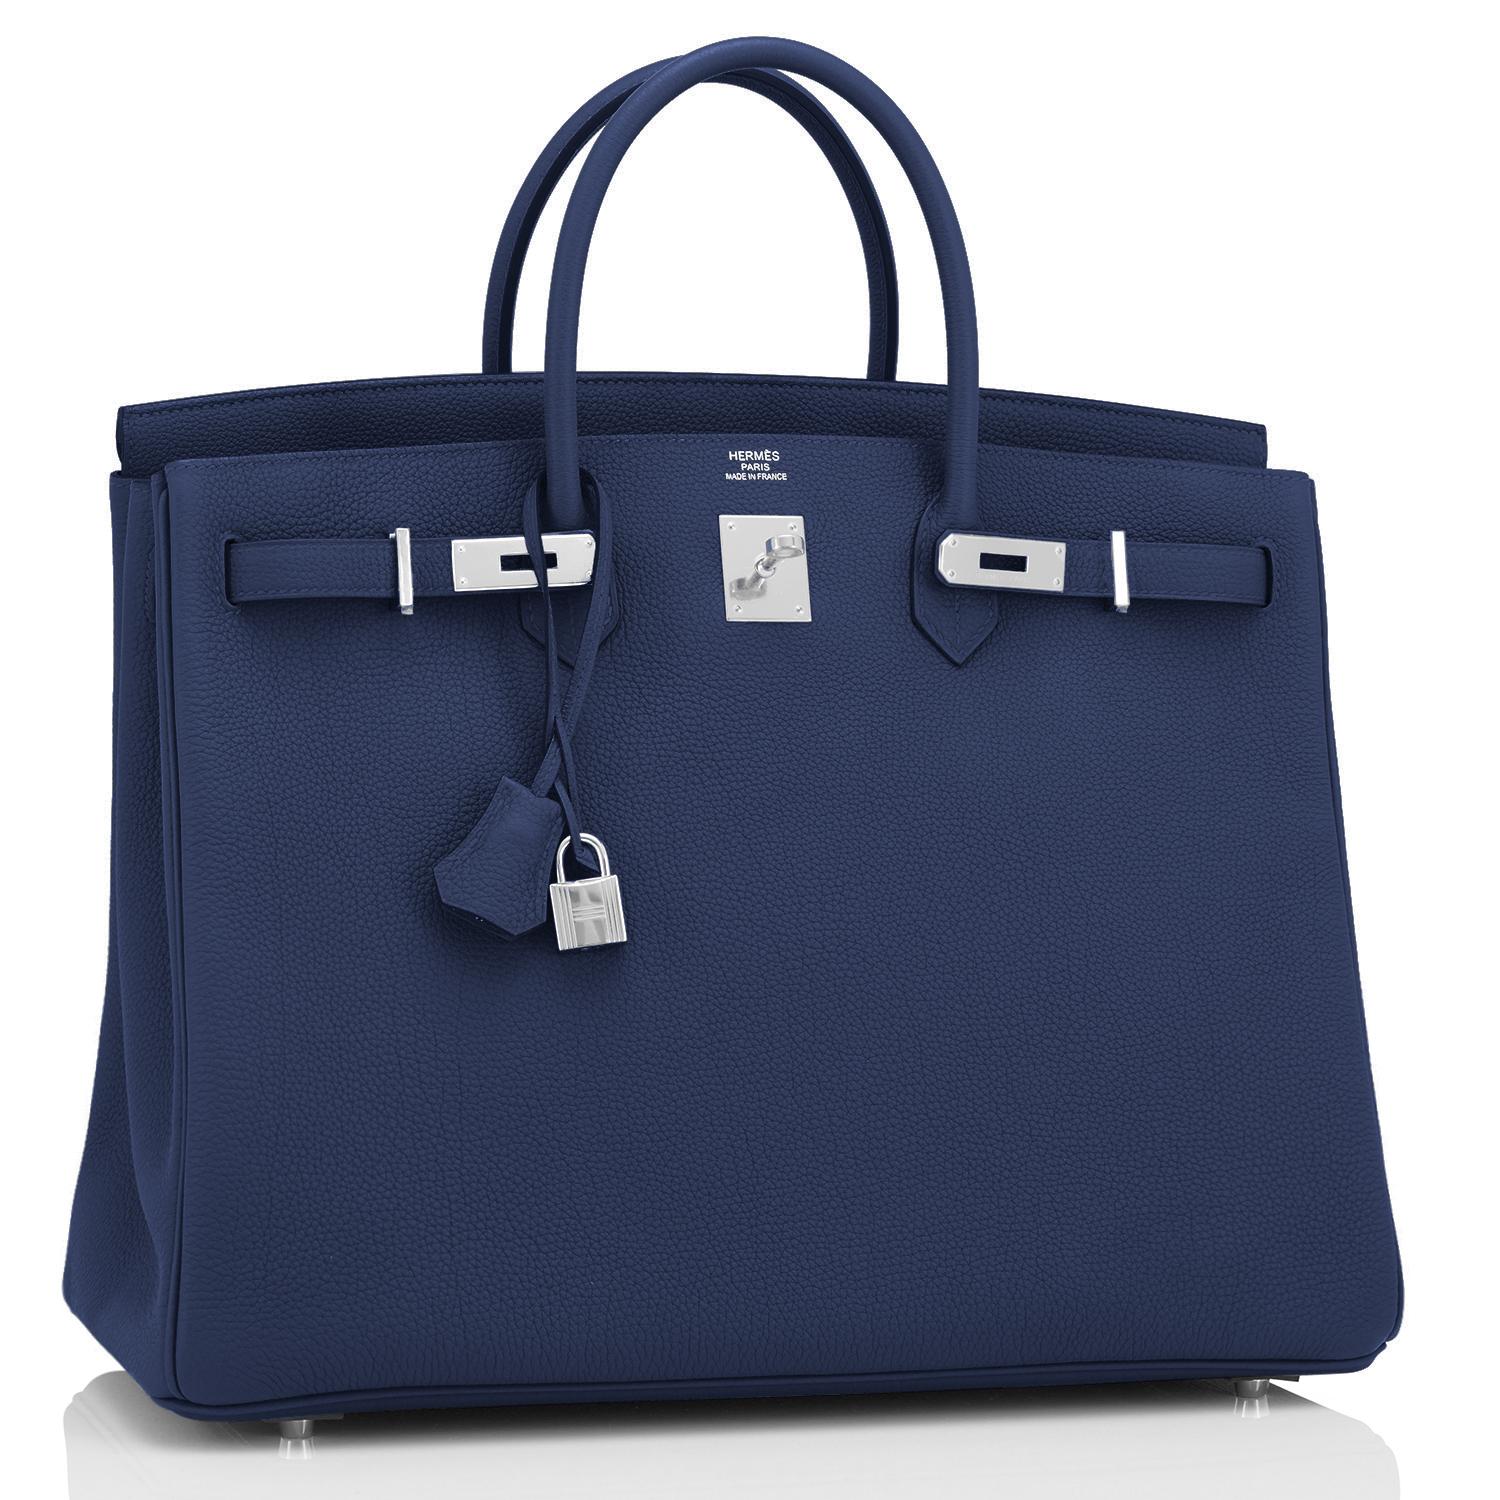 Hermes Birkin 40 Blue Nuit Navy Togo Birkin Bag Z Stamp, 2021 ULTRA RARE
Finally! The ultra rare perfect navy Birkin 40cm has arrived!
Just purchased from Hermes store; bag bears new 2021 interior Z Stamp (only one in market!)
Brand New in Box.